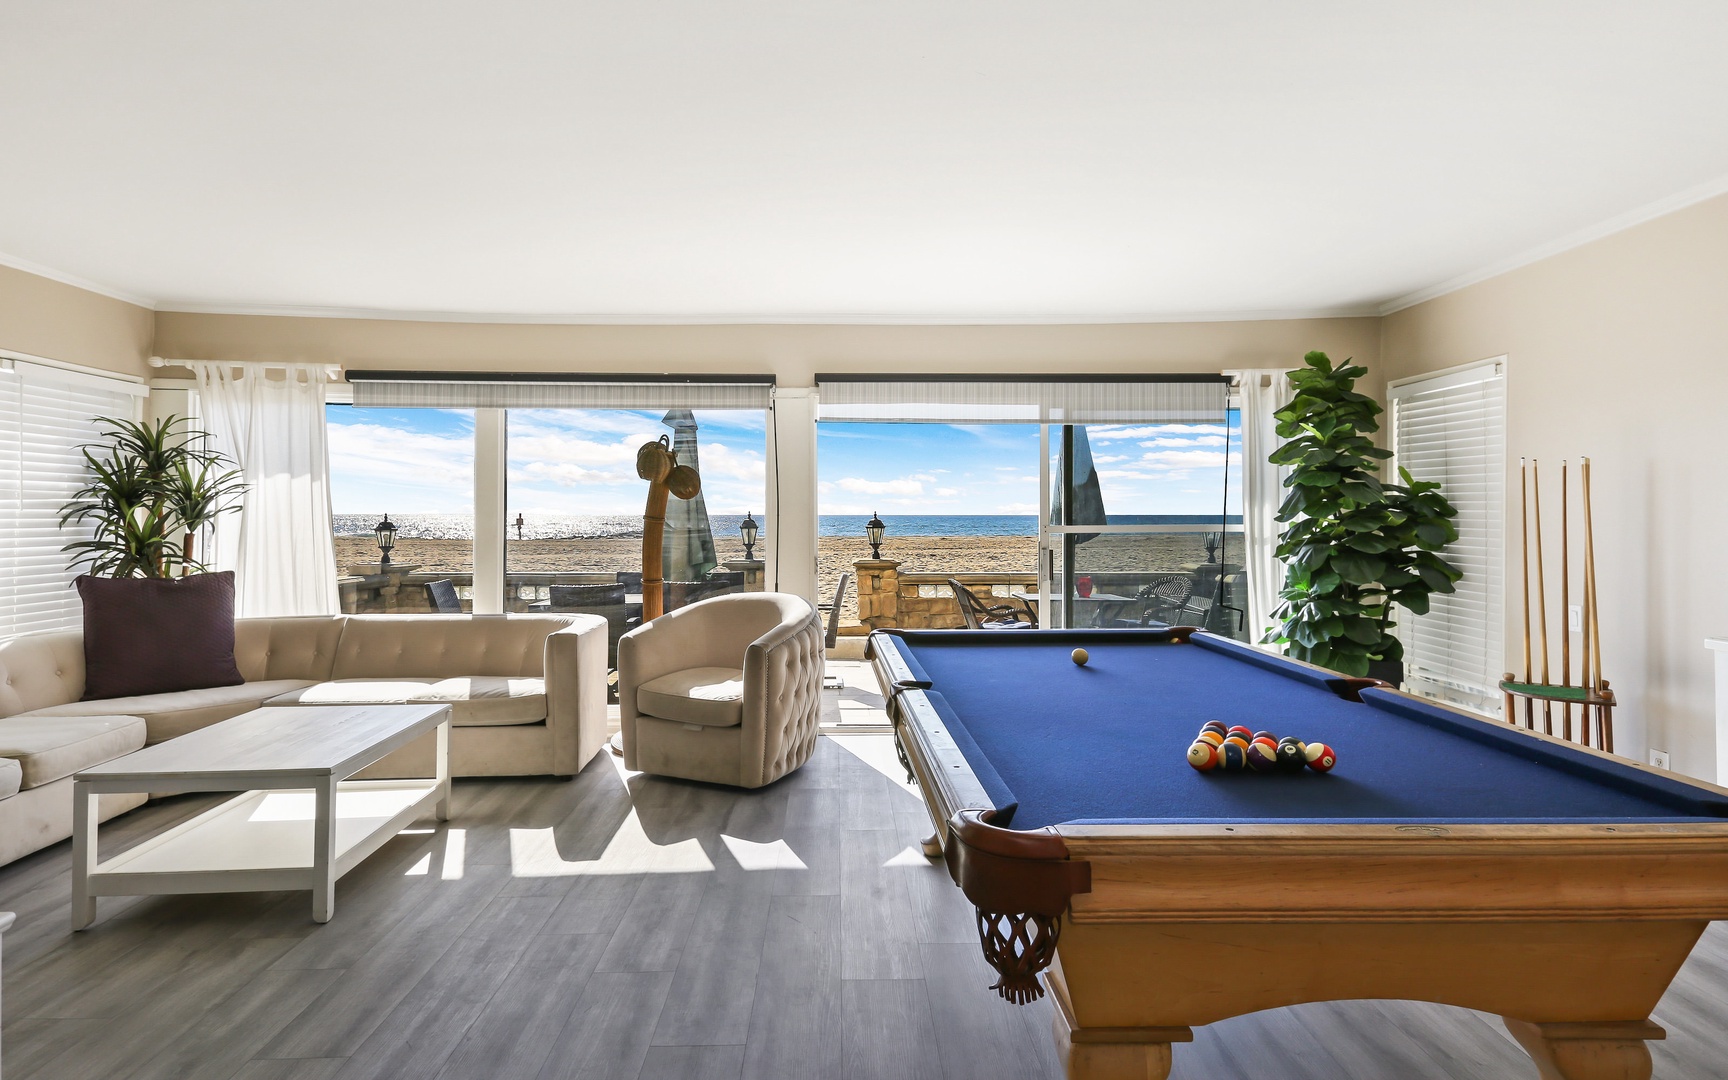 Beach front house with pool table